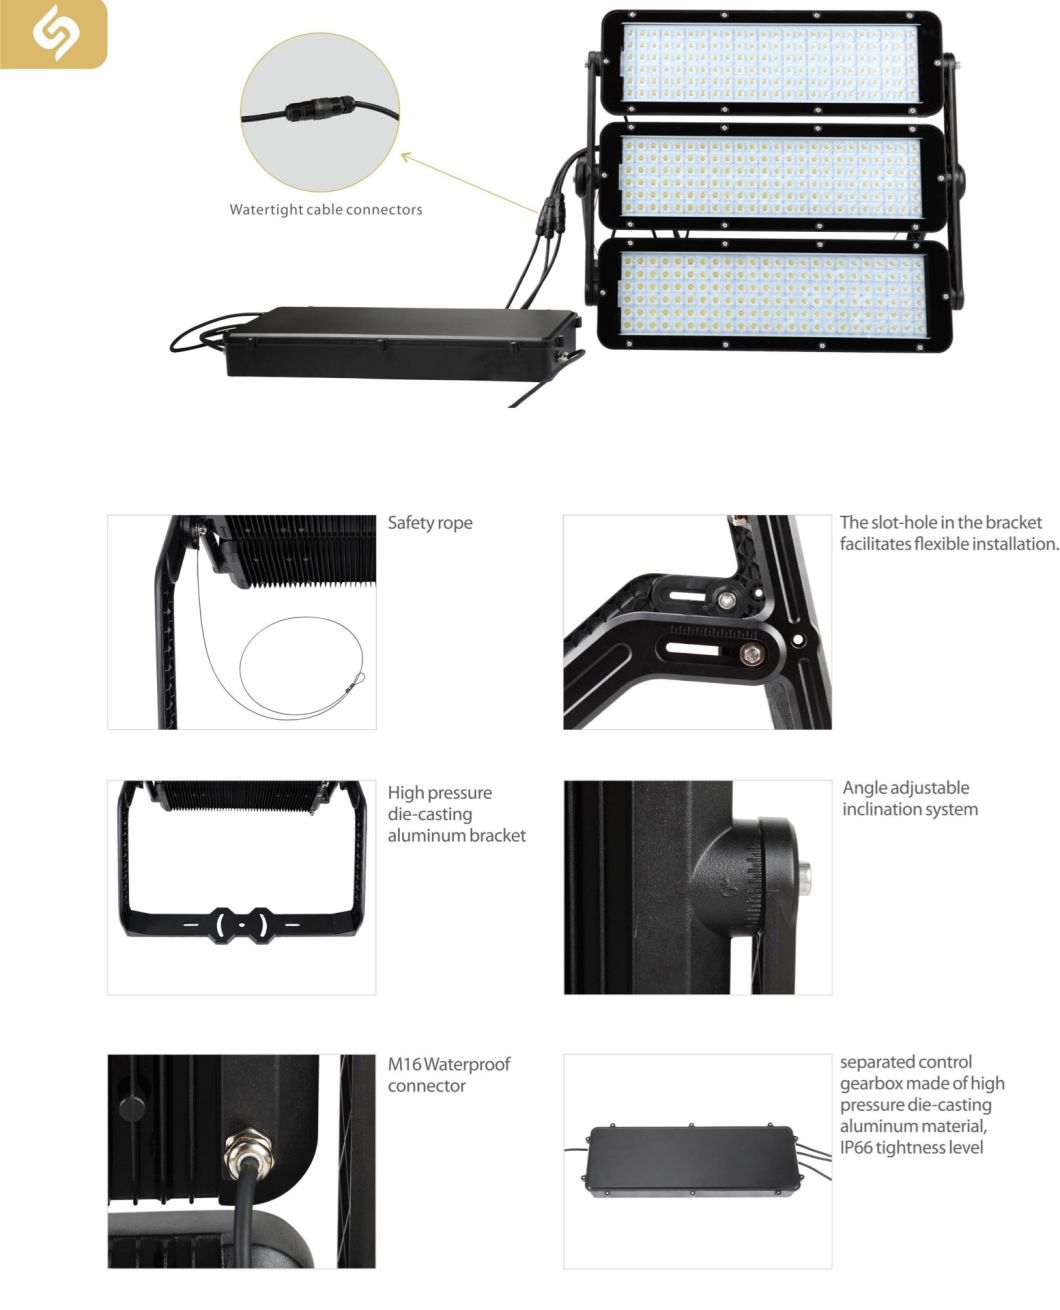 Zhihai Factory Sale 900W LED Flood Light for Industrial Architecture and Marine Application